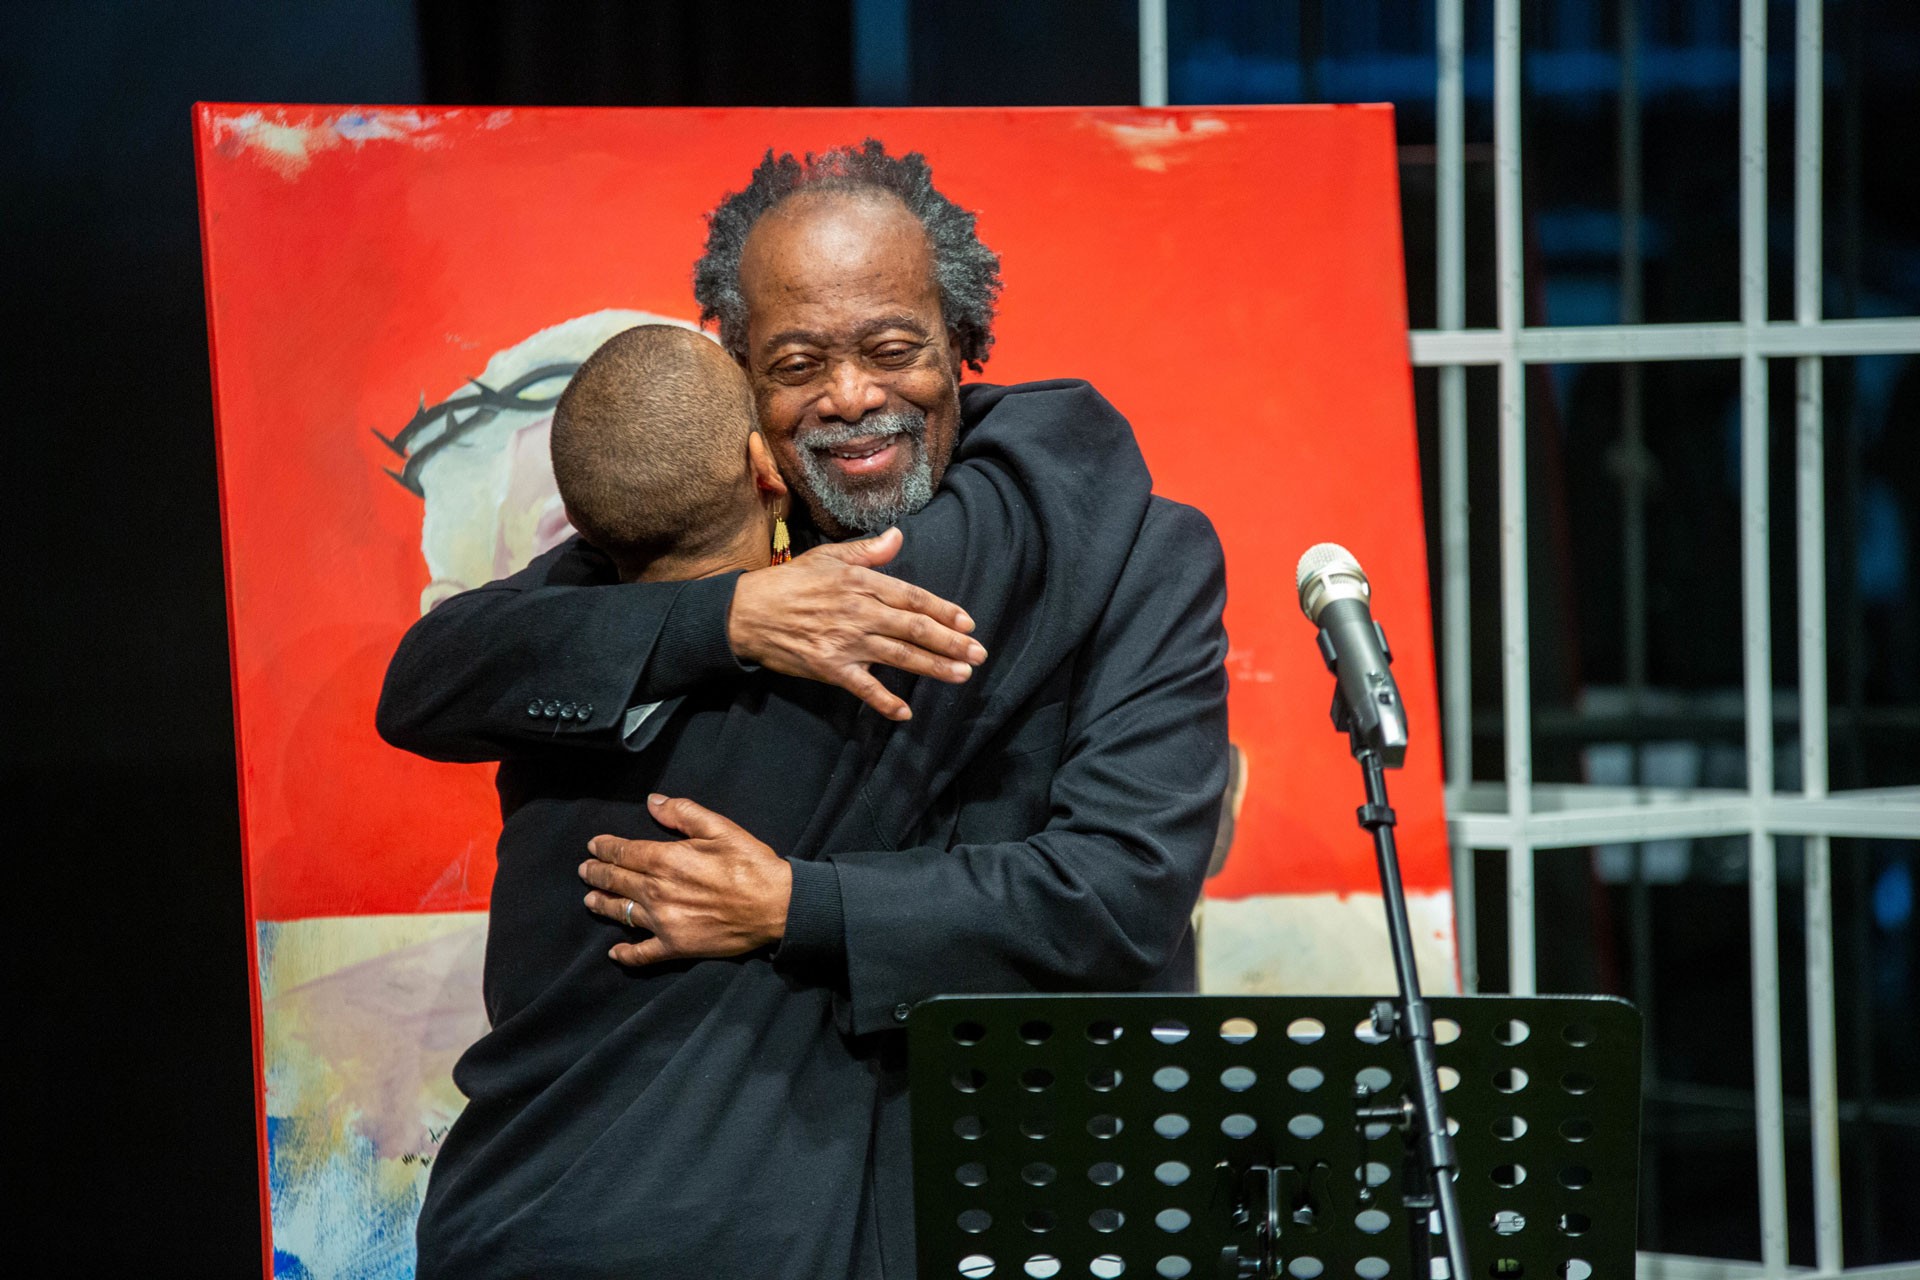 Two Black people embrace on a stage in front of a microphone